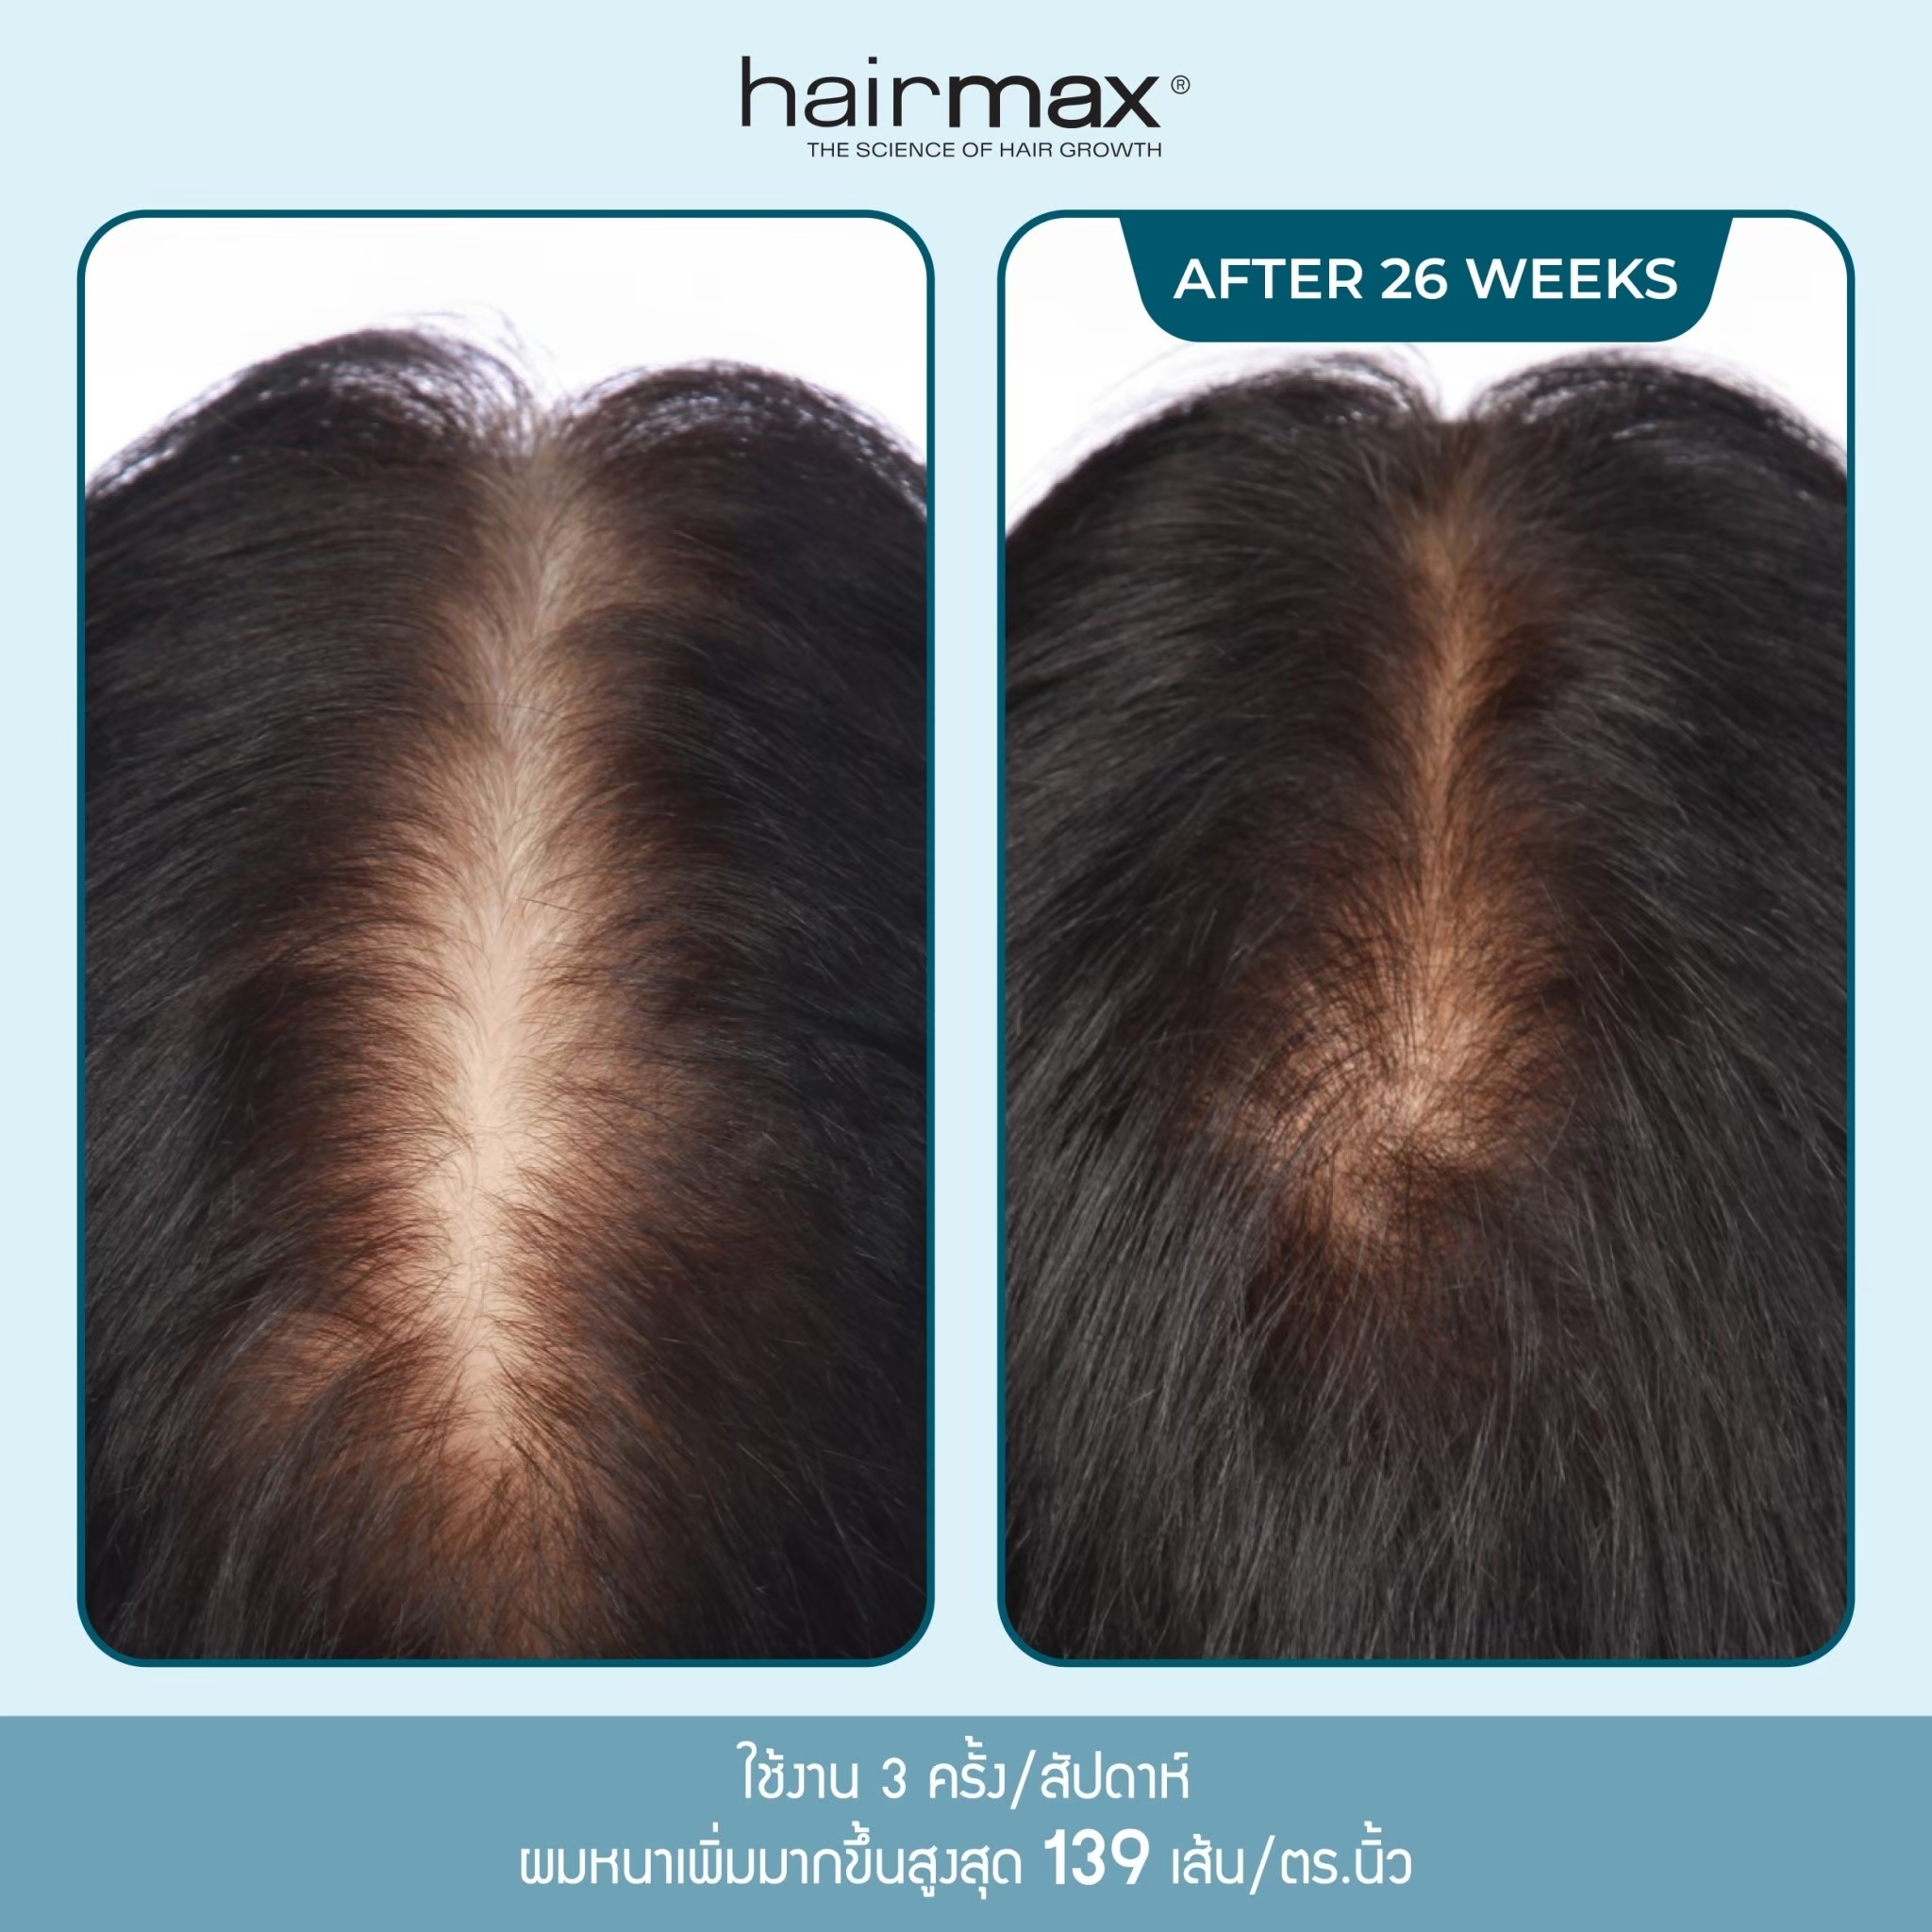 Hairmax Hair Growth Laser Band (FDA Cleared), LaserBand 82 ComfortFlex,  Full/Partial Coverage, Hair Growth for Men & Hair Regrowth for Women, Hair  Laser Growth, (100% Medical Grade Lasers, Not LEDs)